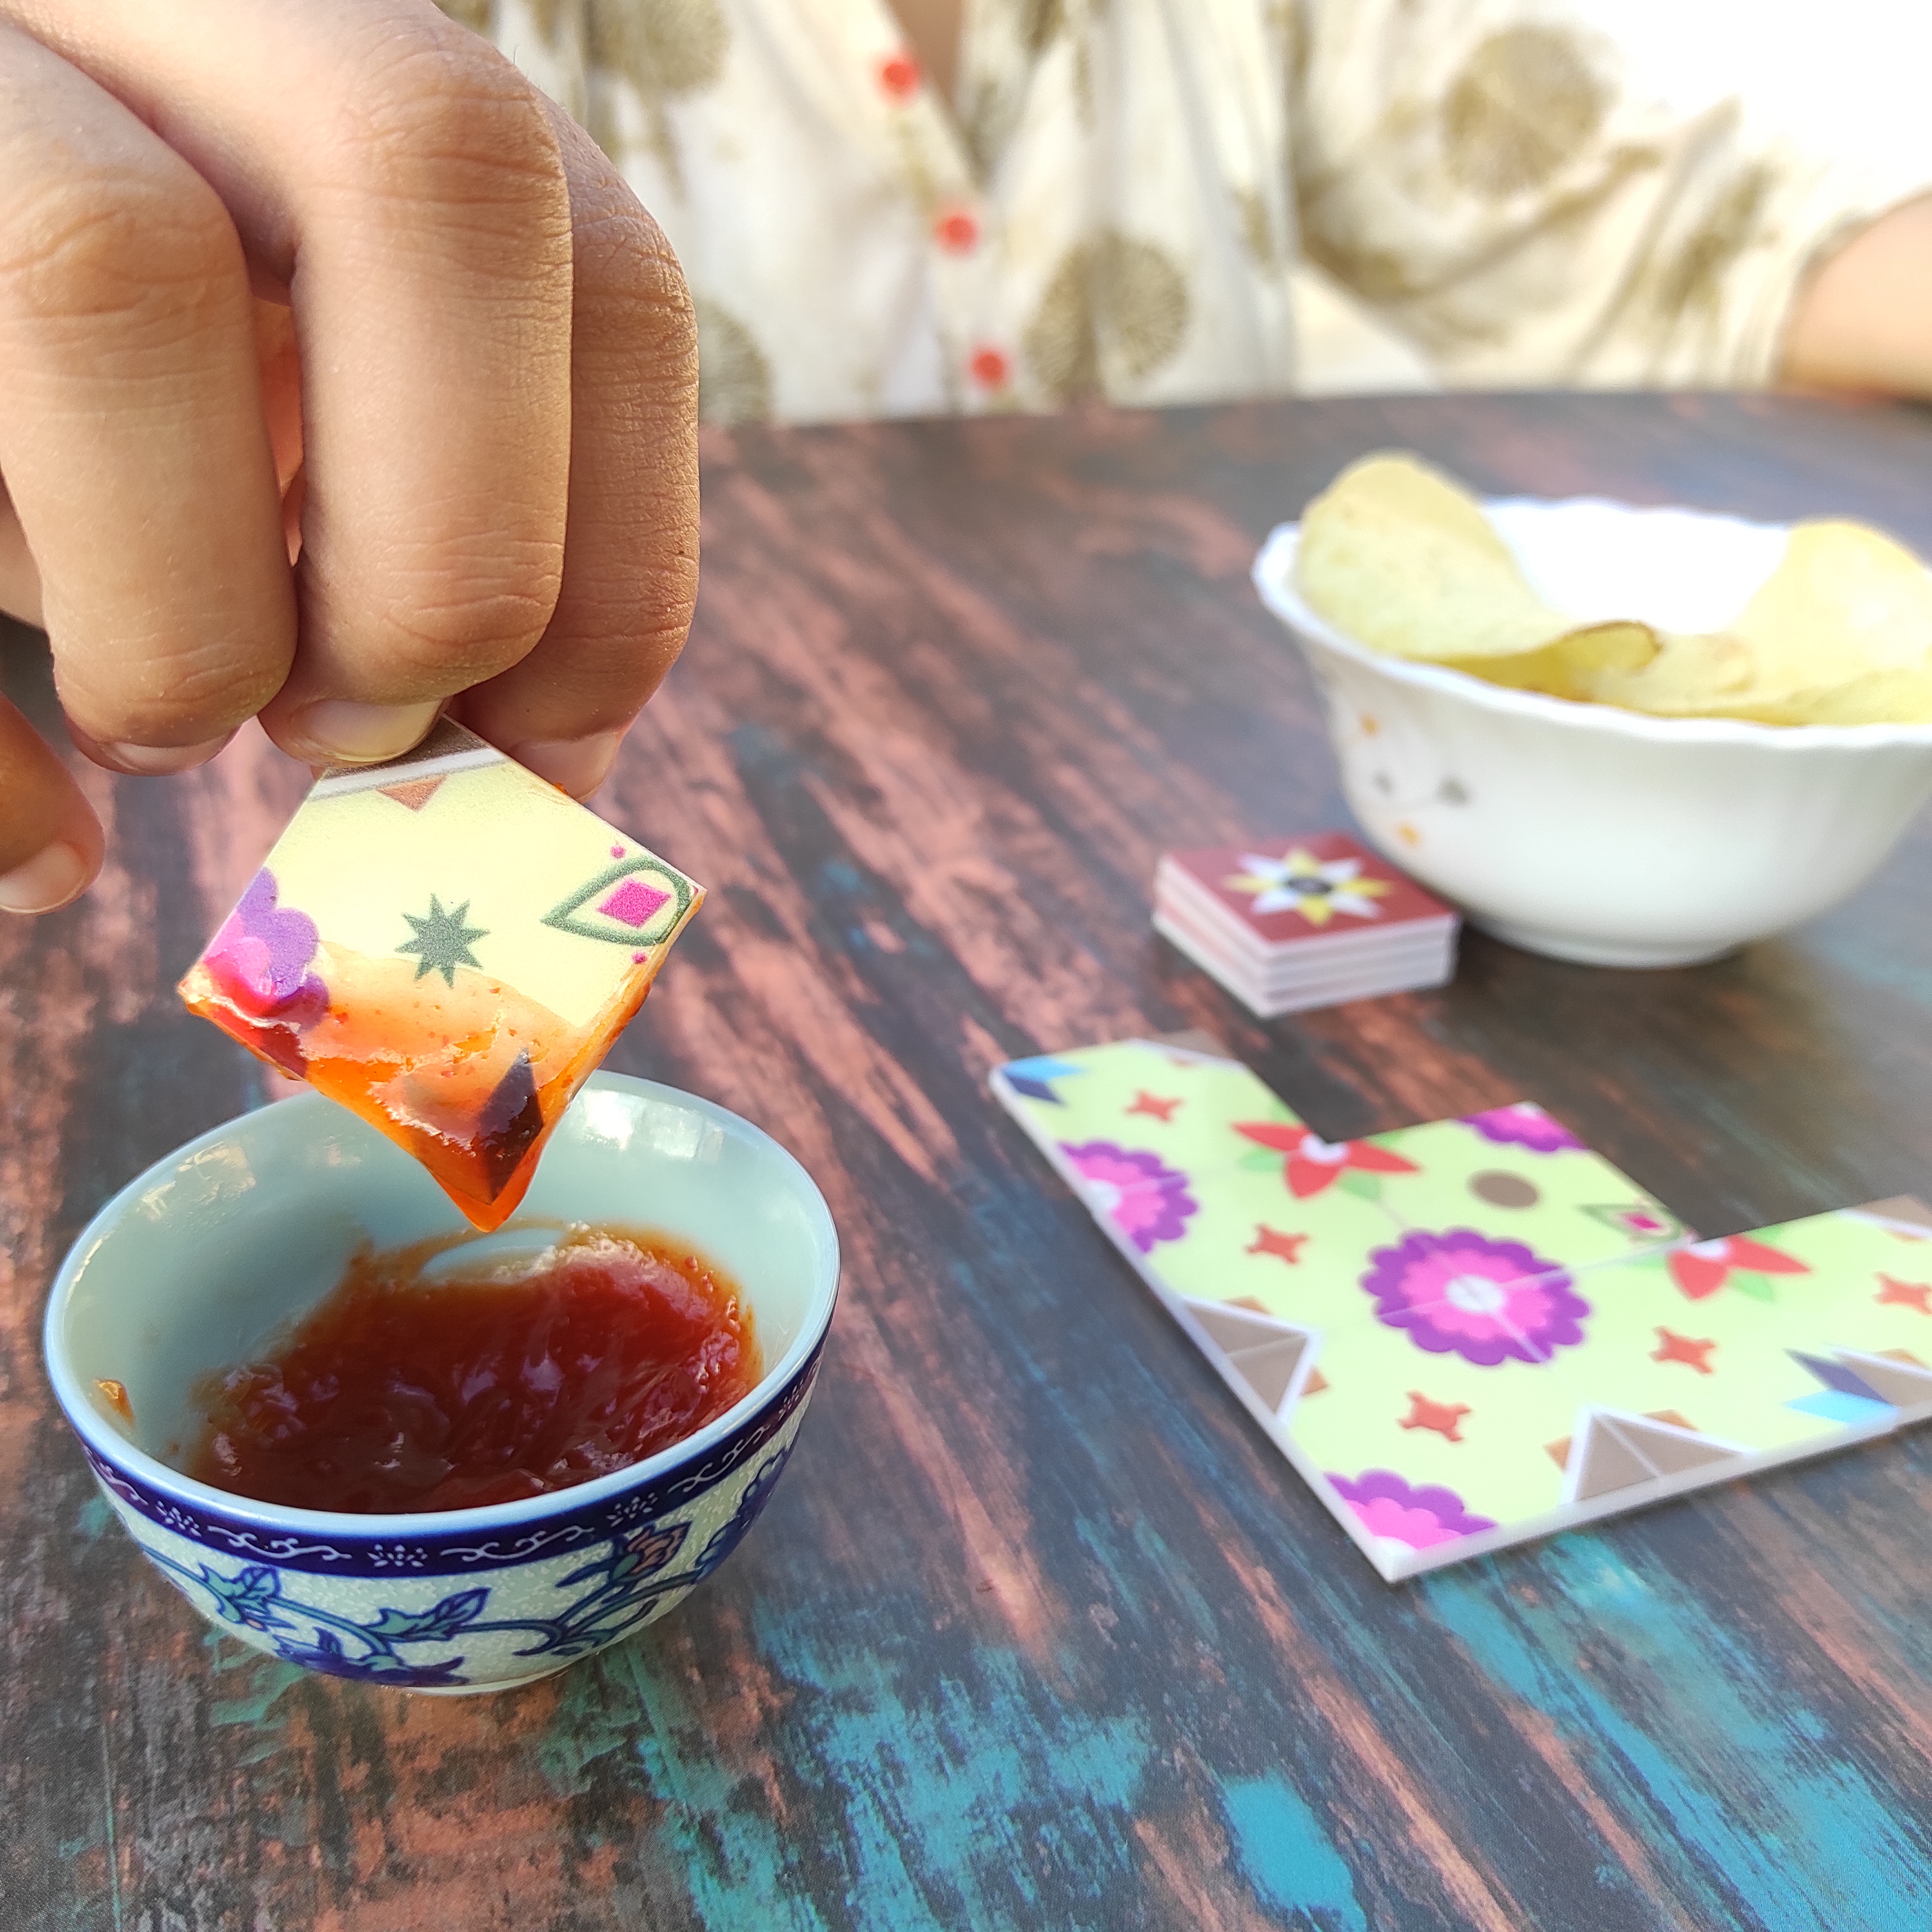 Image of a person dipping a playing tile of the game Athangudi: Artisans of Chettinad into a bowl of Ketchup. The game is going on in the background, and a bowl of potato chips is also seen indicating she might have dipped the tile in the ketchup by mistake instead of the chips. 